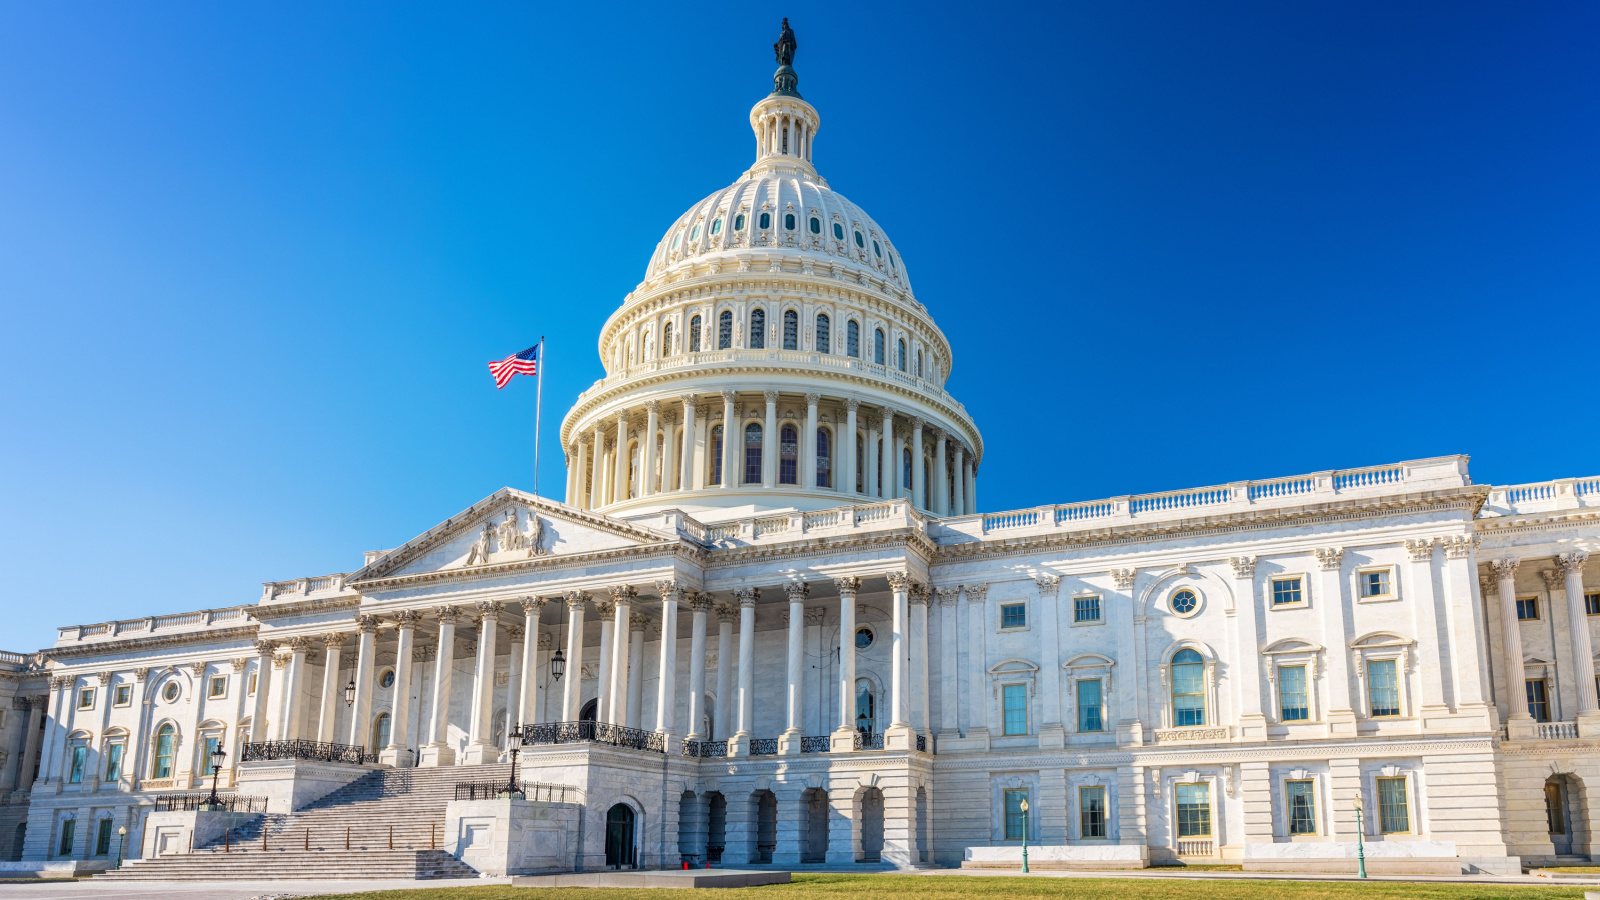 image credit: S.Borisov/Shutterstock <p>The case of Representative Pat Fallon (R-Texas) exemplifies the indecision characterizing this period, with his oscillation between running for re-election to the House or returning to state politics. This uncertainty is reflective of the broader environment in Congress, where members are reevaluating their political careers amid a tumultuous and unpredictable landscape.</p>